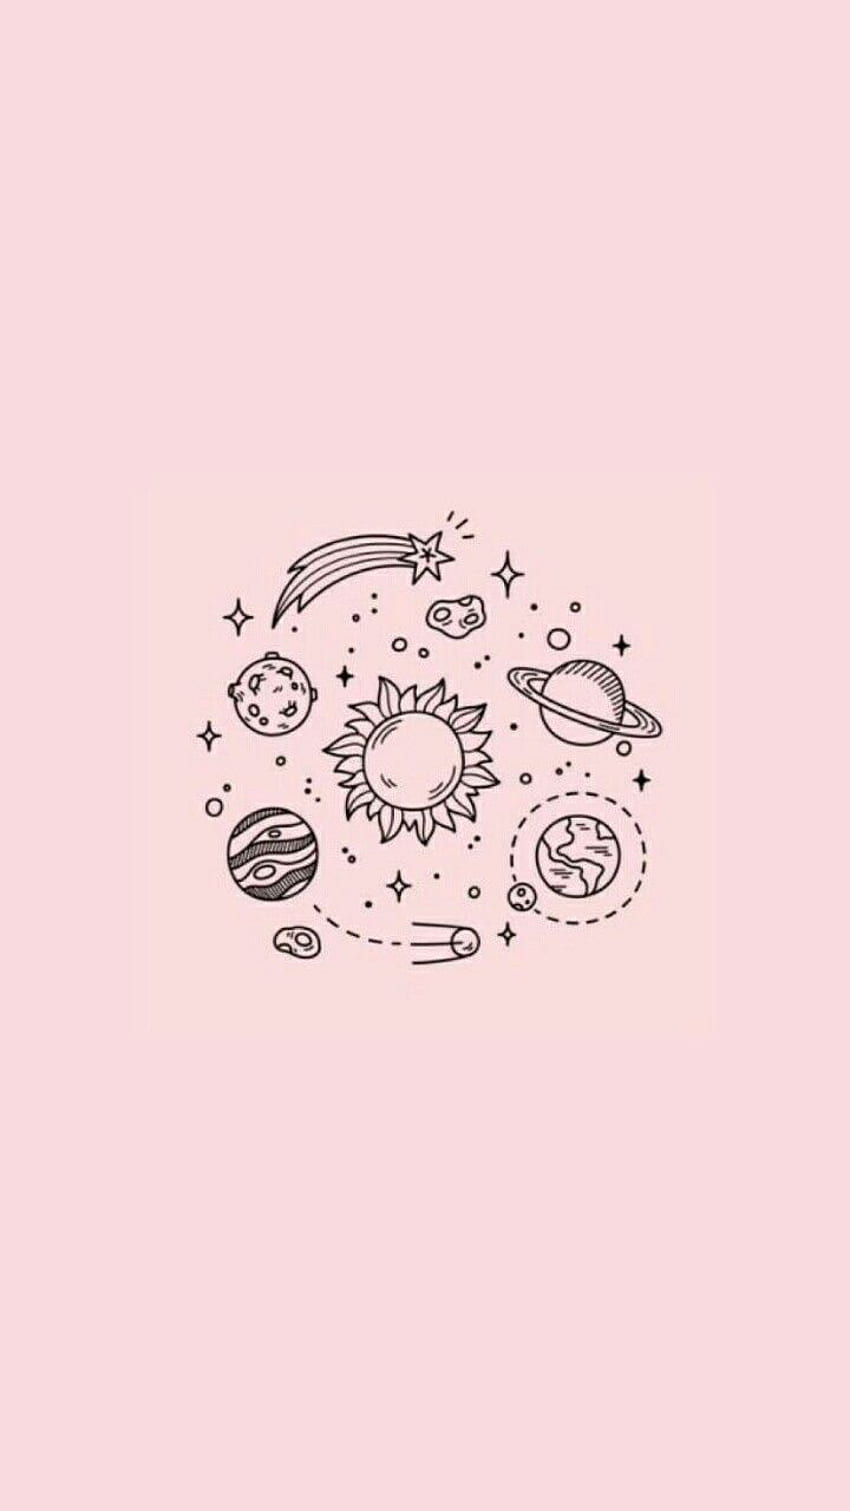 Wallpaper phone, phone background, aesthetic, space, planets - Cute iPhone, cute, space, pretty